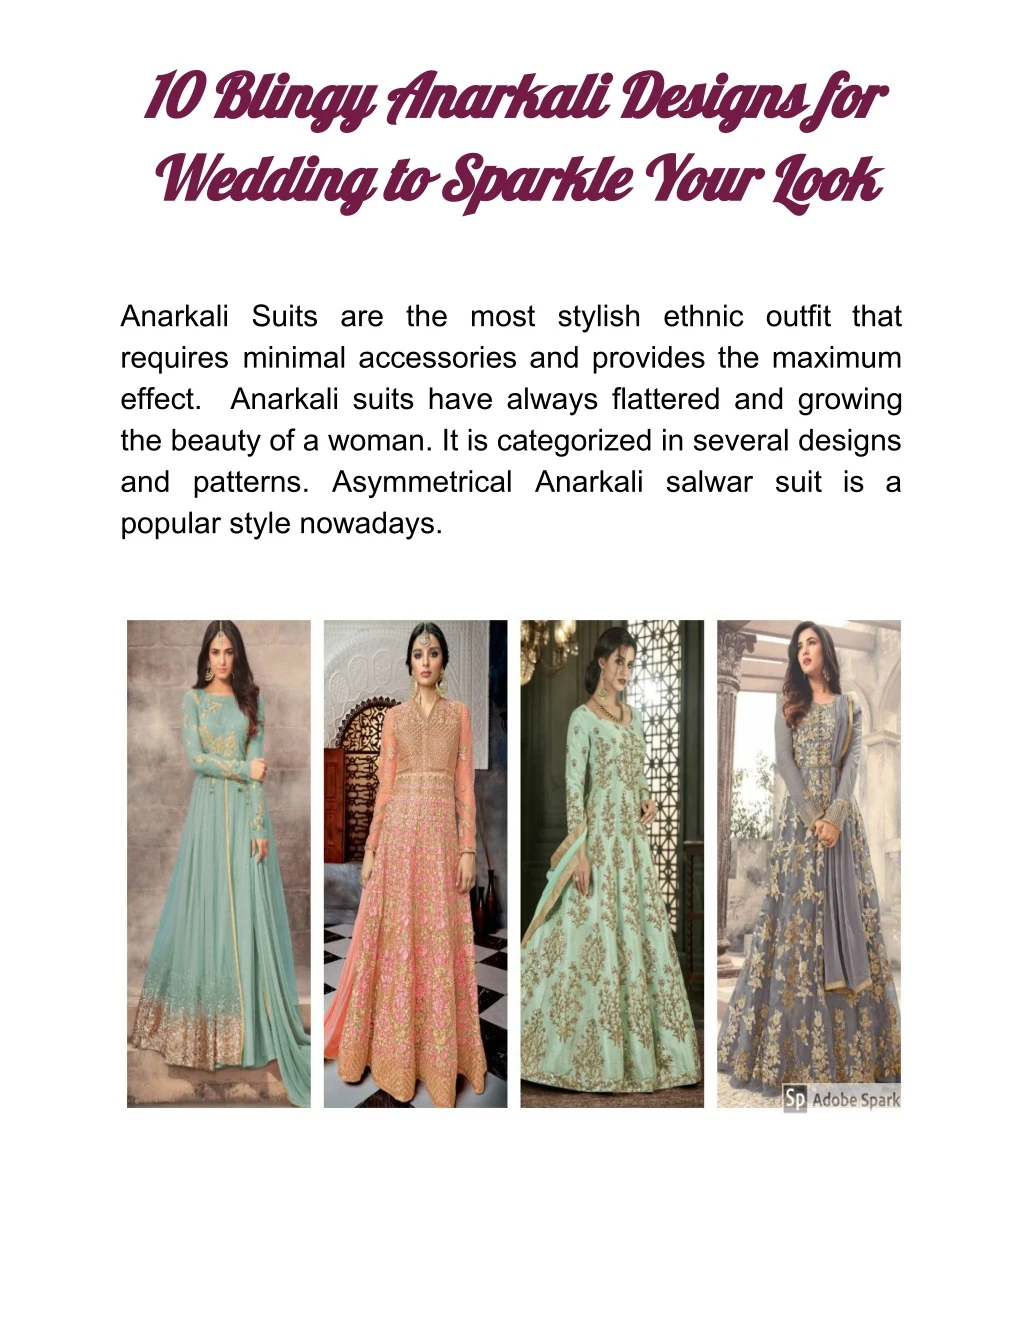 10 blingy anarkali designs for wedding to sparkle